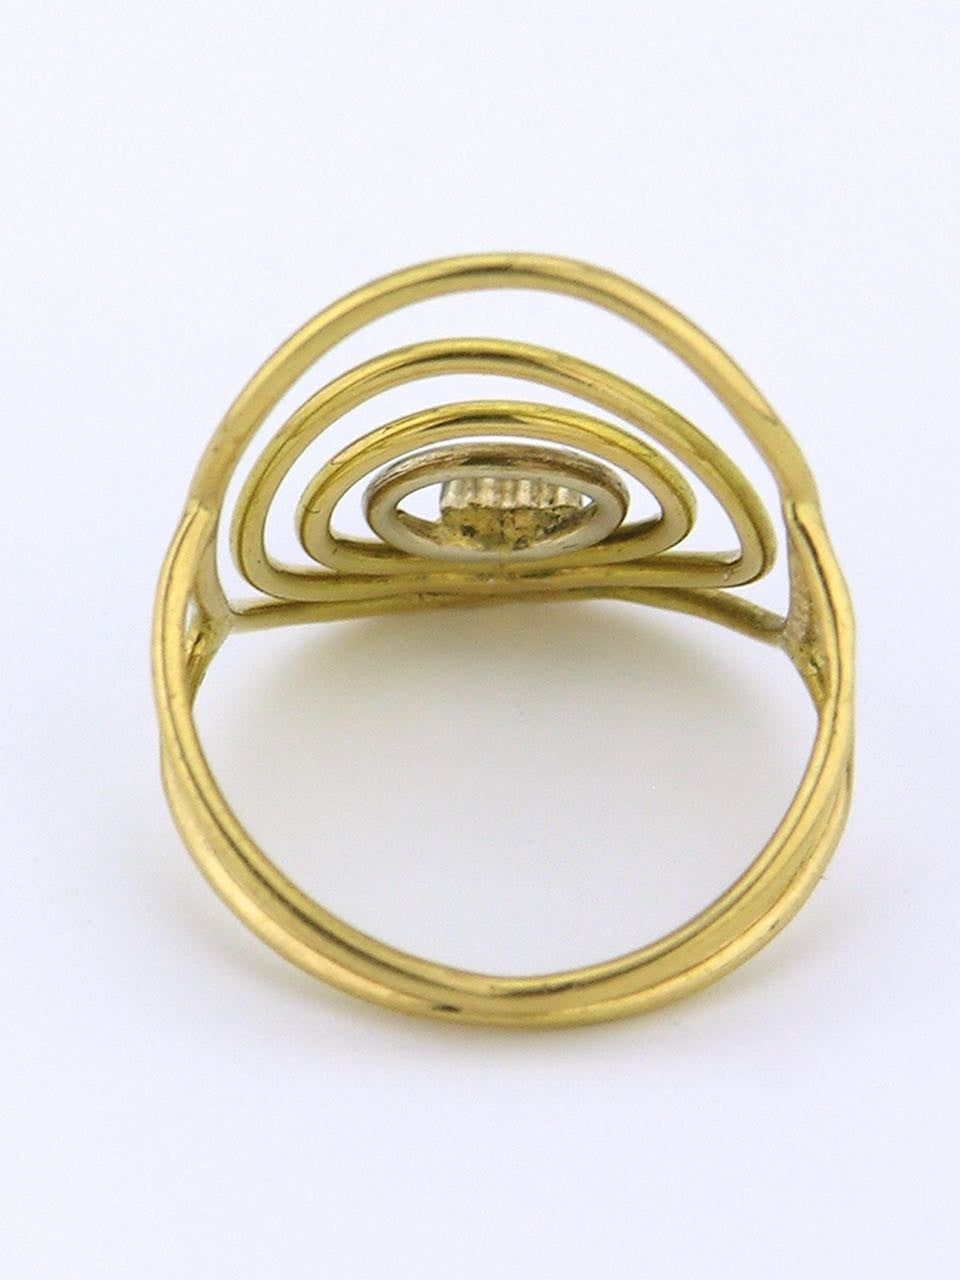 Italian modernist 18k yellow and white gold wire ring